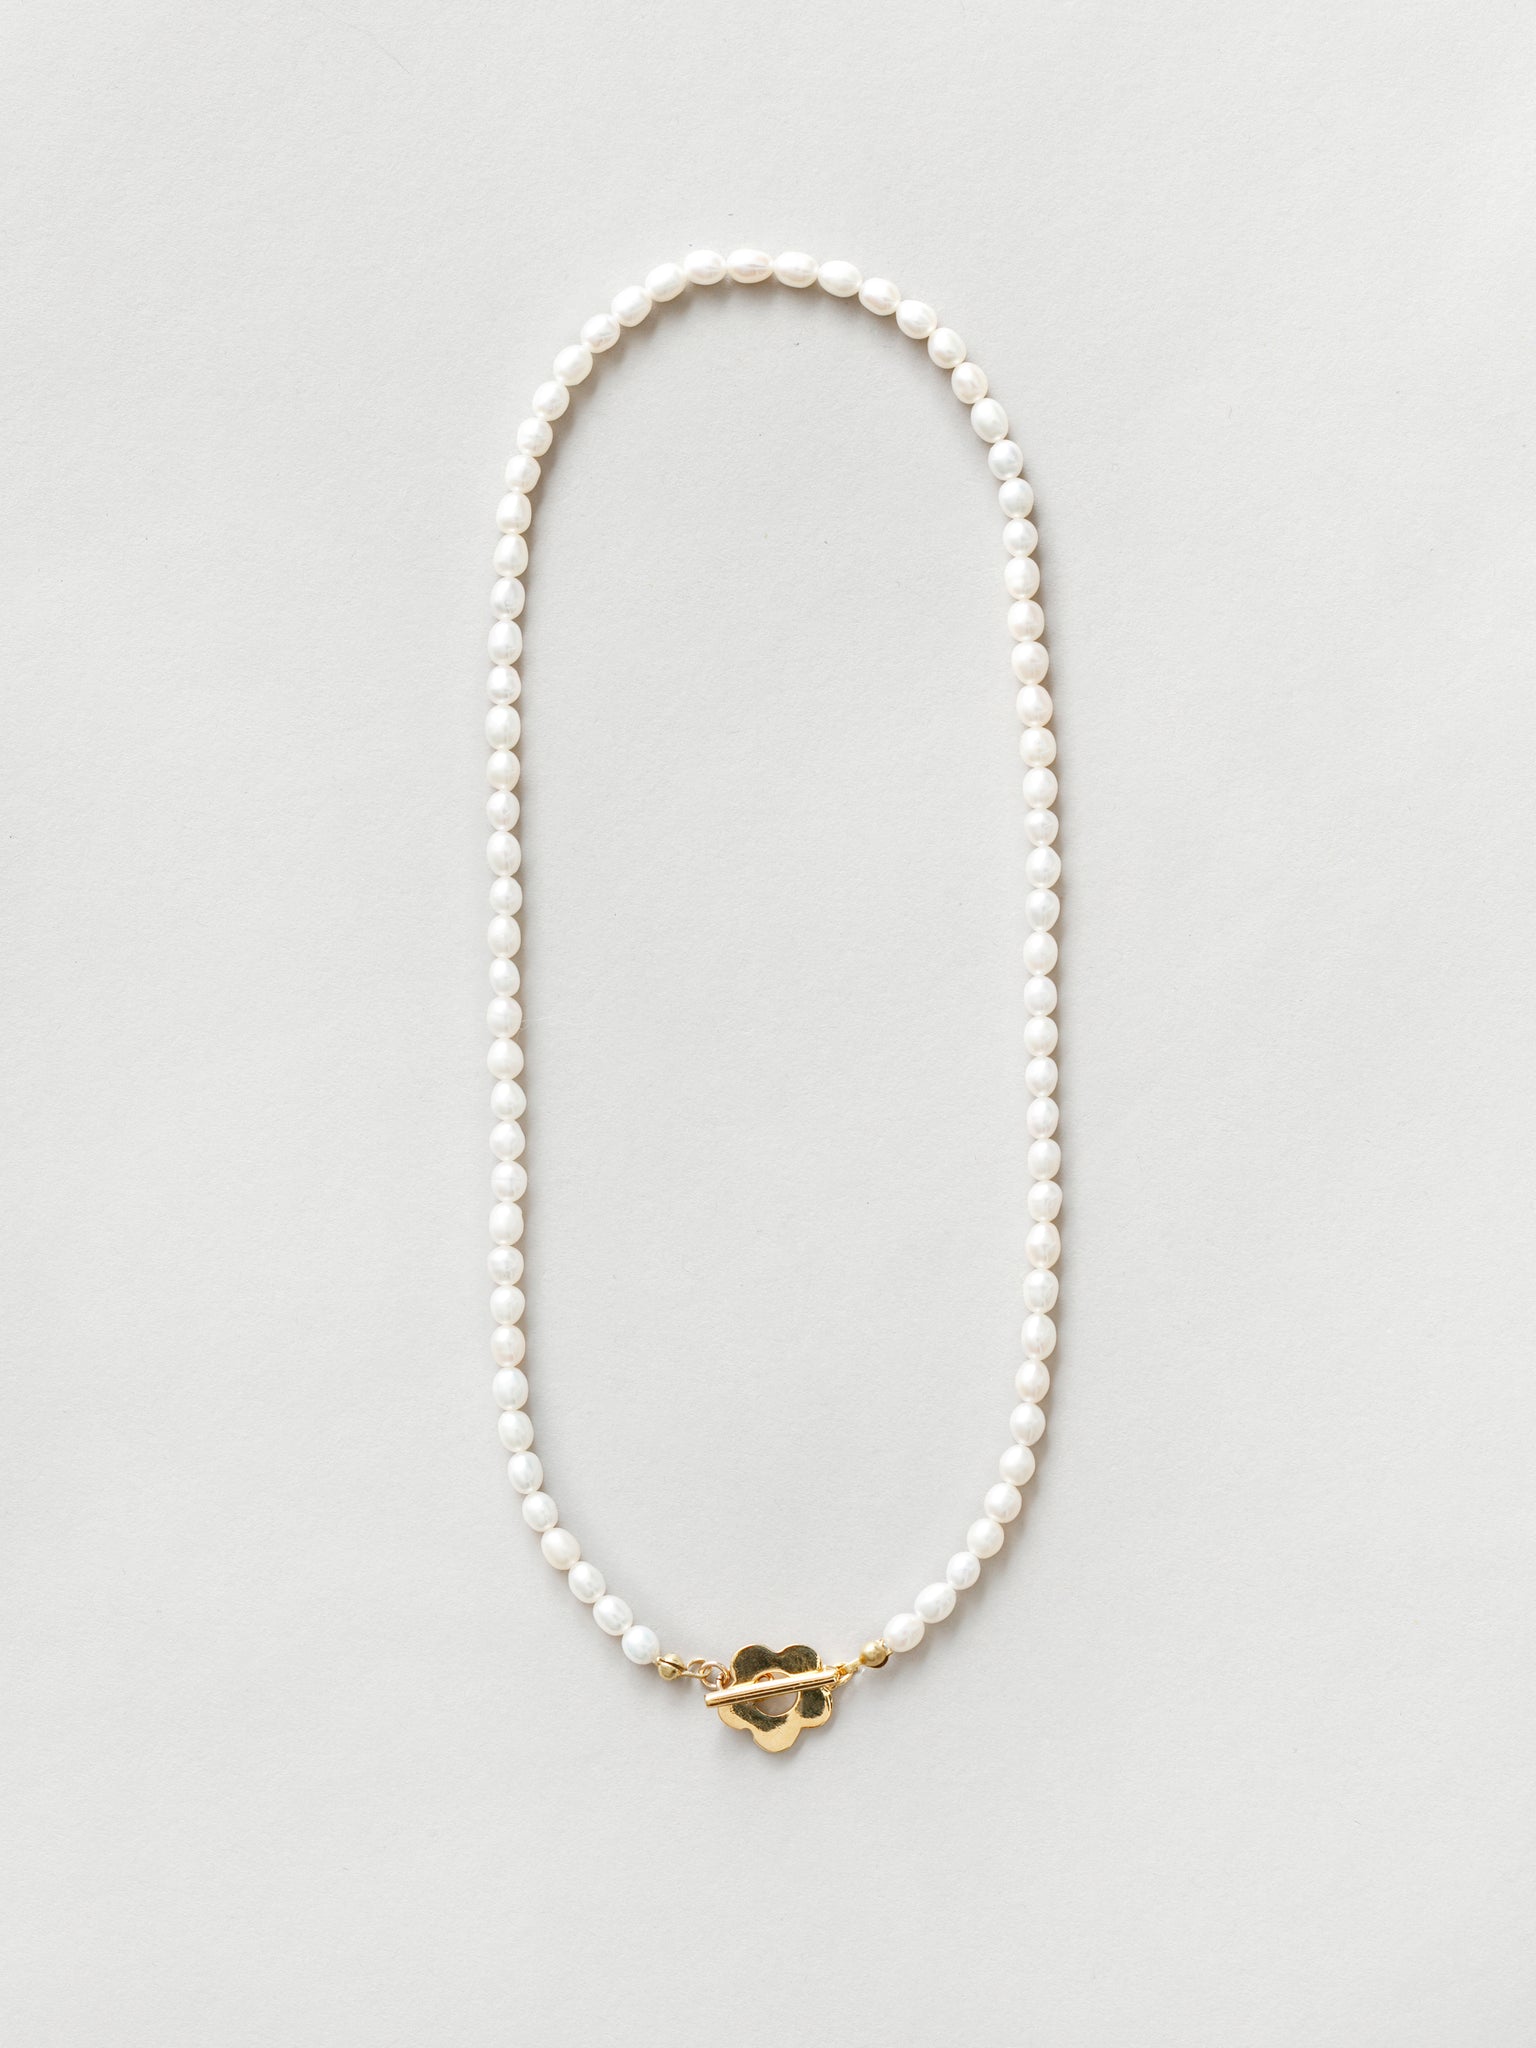 Sofia Pearl Necklace in Gold